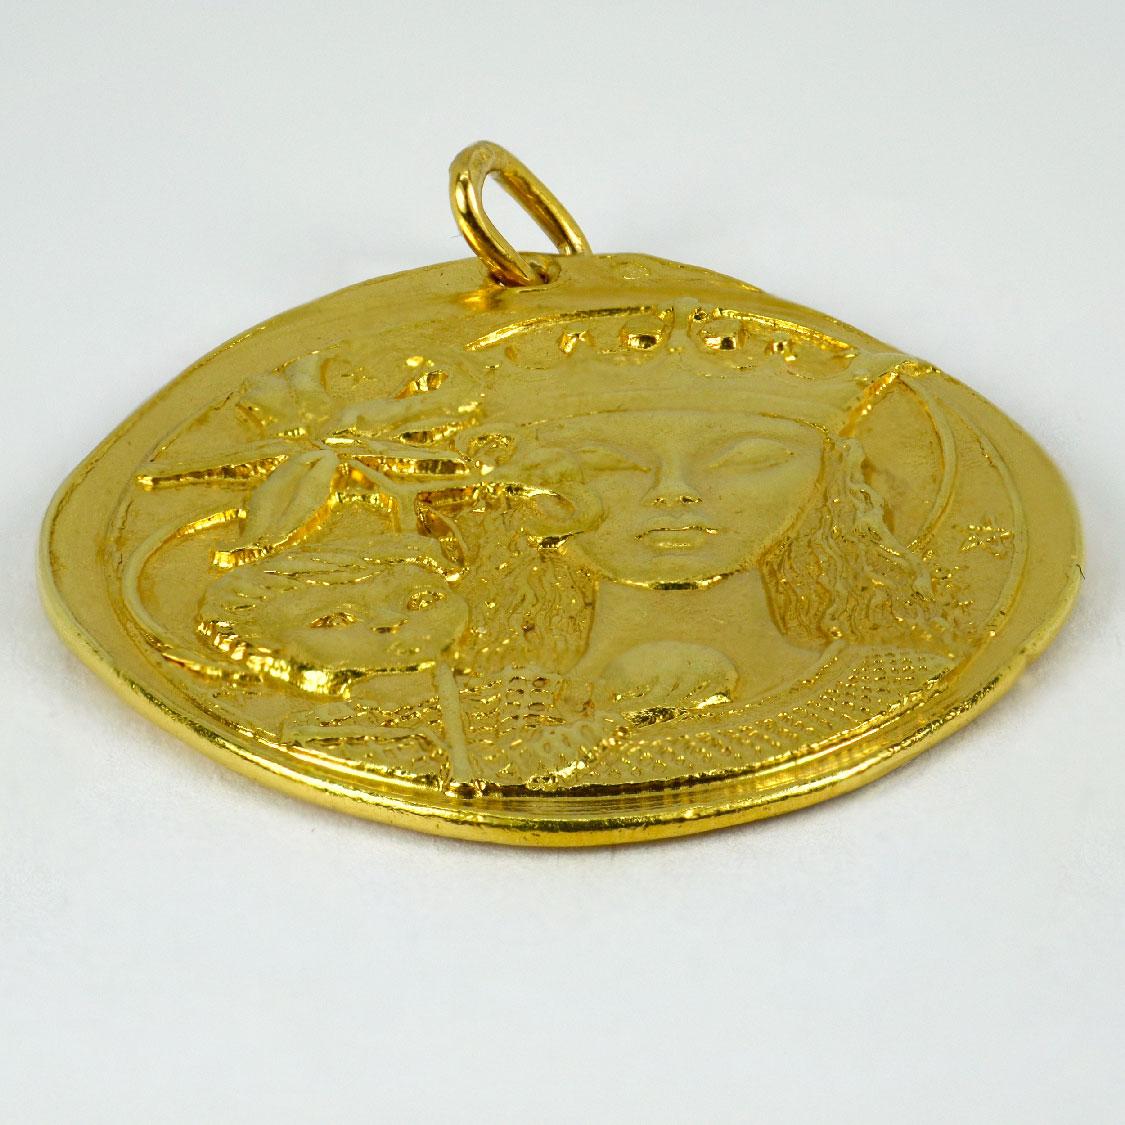 An 18 karat (18K) yellow gold pendant designed as a medal depicting the Madonna and Child with lilies. The reverse depicting a cross. Stamped with the owl for 18 karat gold and French import with unknown makers mark. 

Dimensions: 3.2  x 3.1 x 0.2